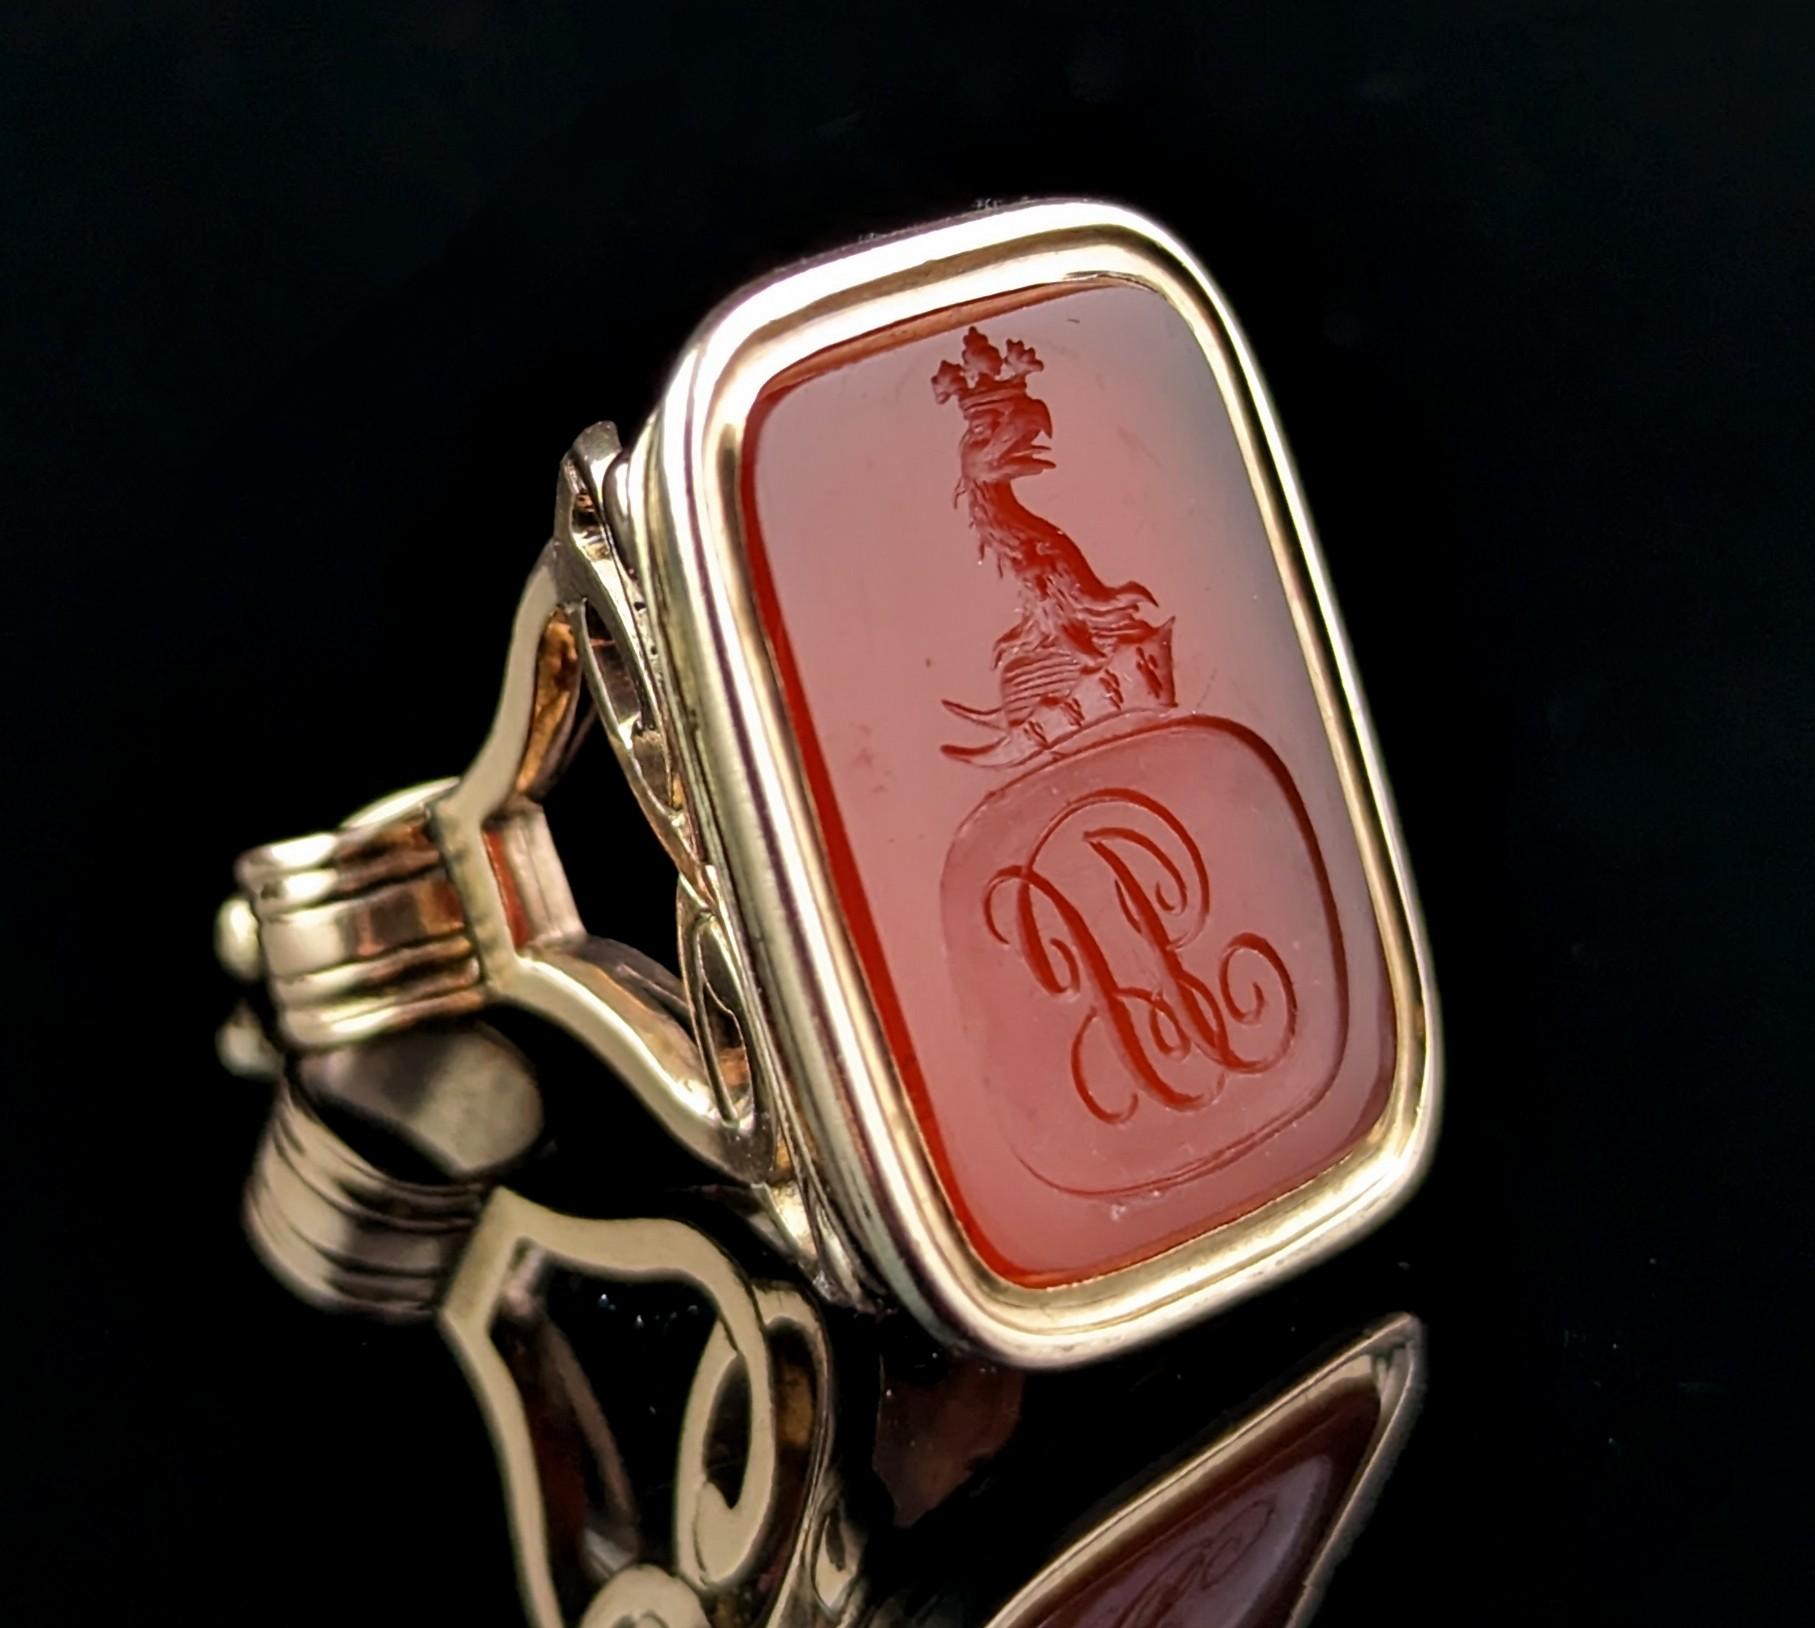 There is something extra special and quite simply mesmerising about antique Heraldic seal fobs.

This fine Georgian intaglio seal fob is crafted in 9ct gold with an openwork scrolling design to the top with an integral bale and a gold bezel